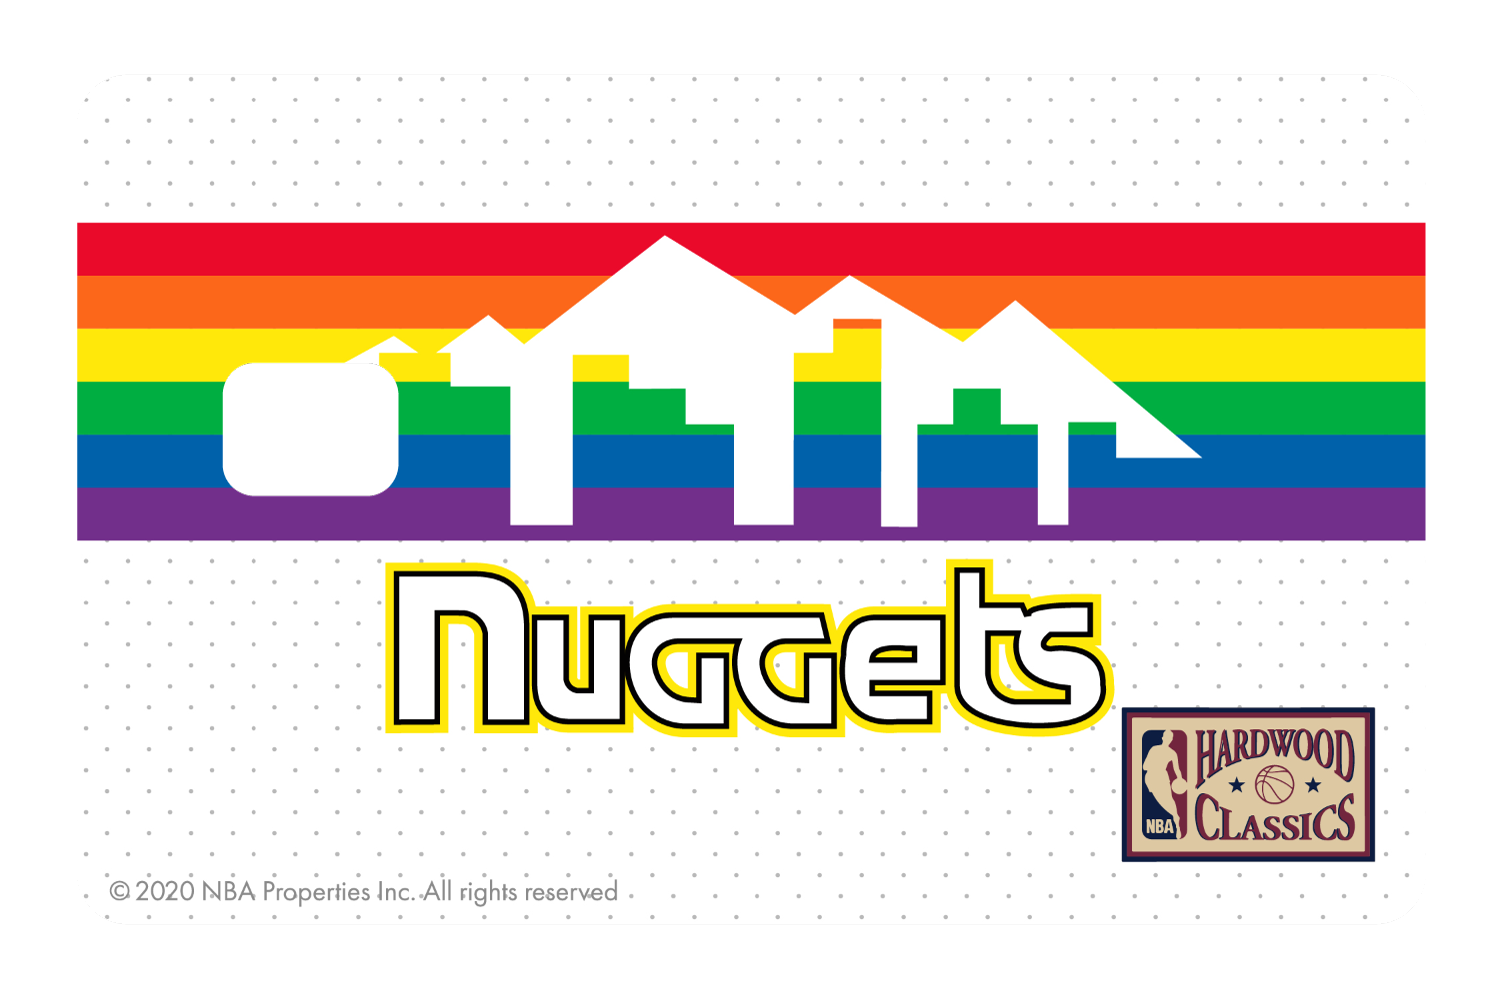 Credit Debit Card Skins | Cucu Covers - Customize Any Bank Card - Denver Nuggets: Home Hardwood Classics Full Cover / Small Chip